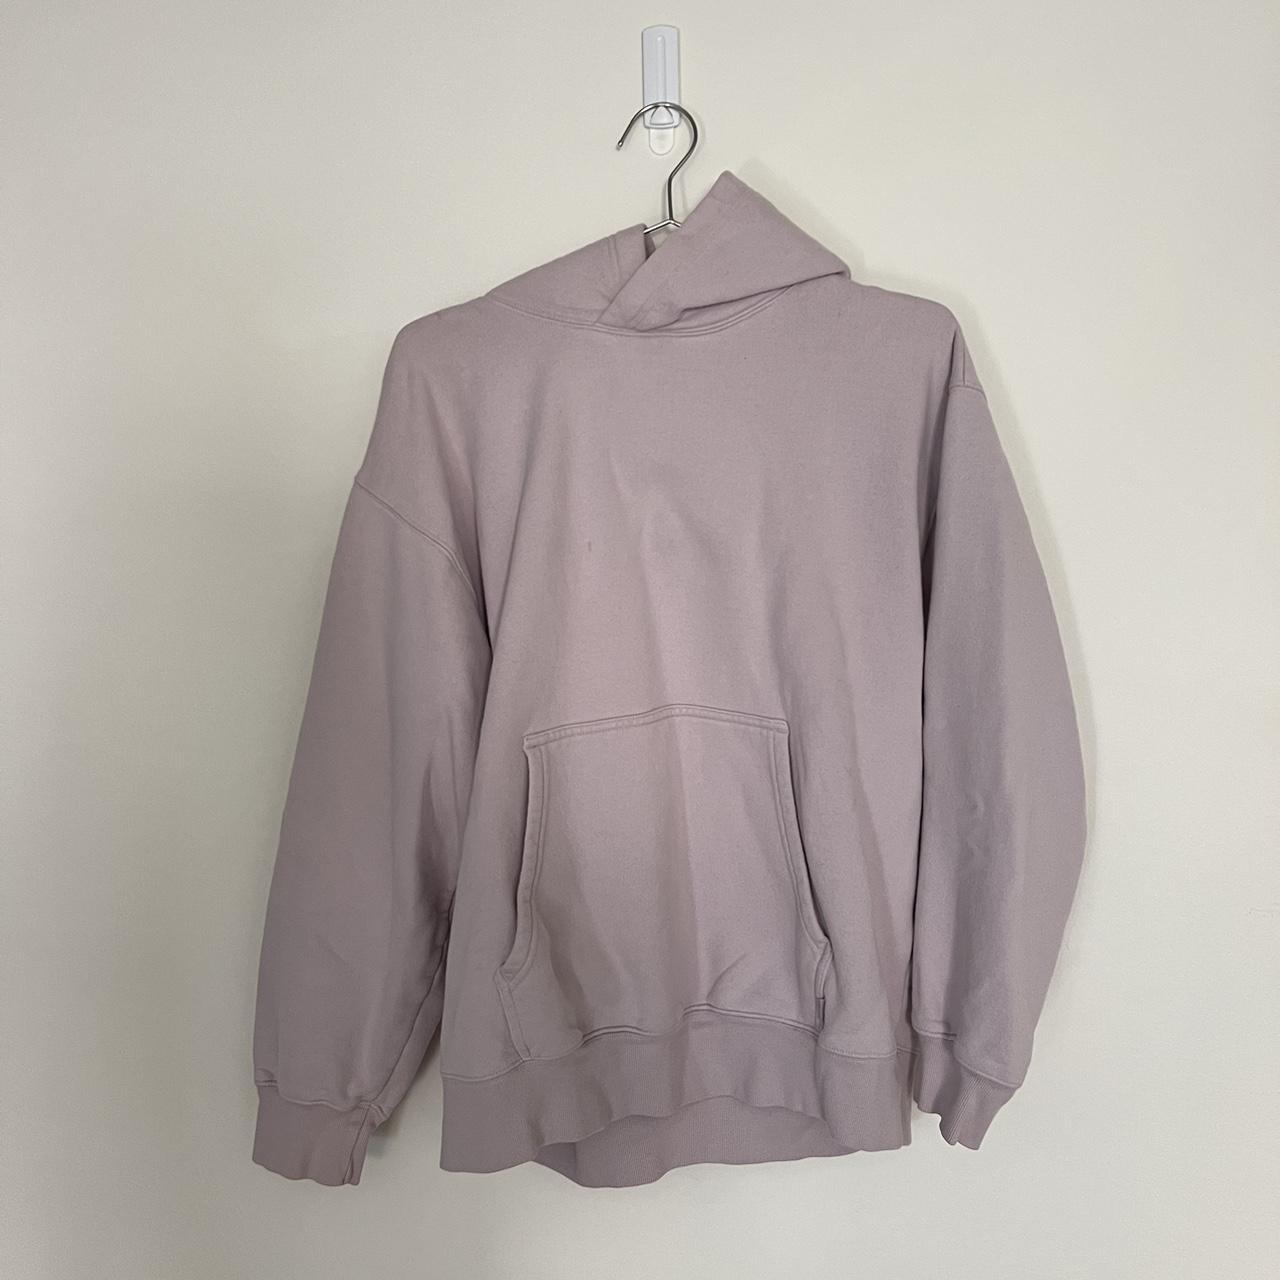 Aritzia Perfect Hoodie Size large. I typically wear... - Depop